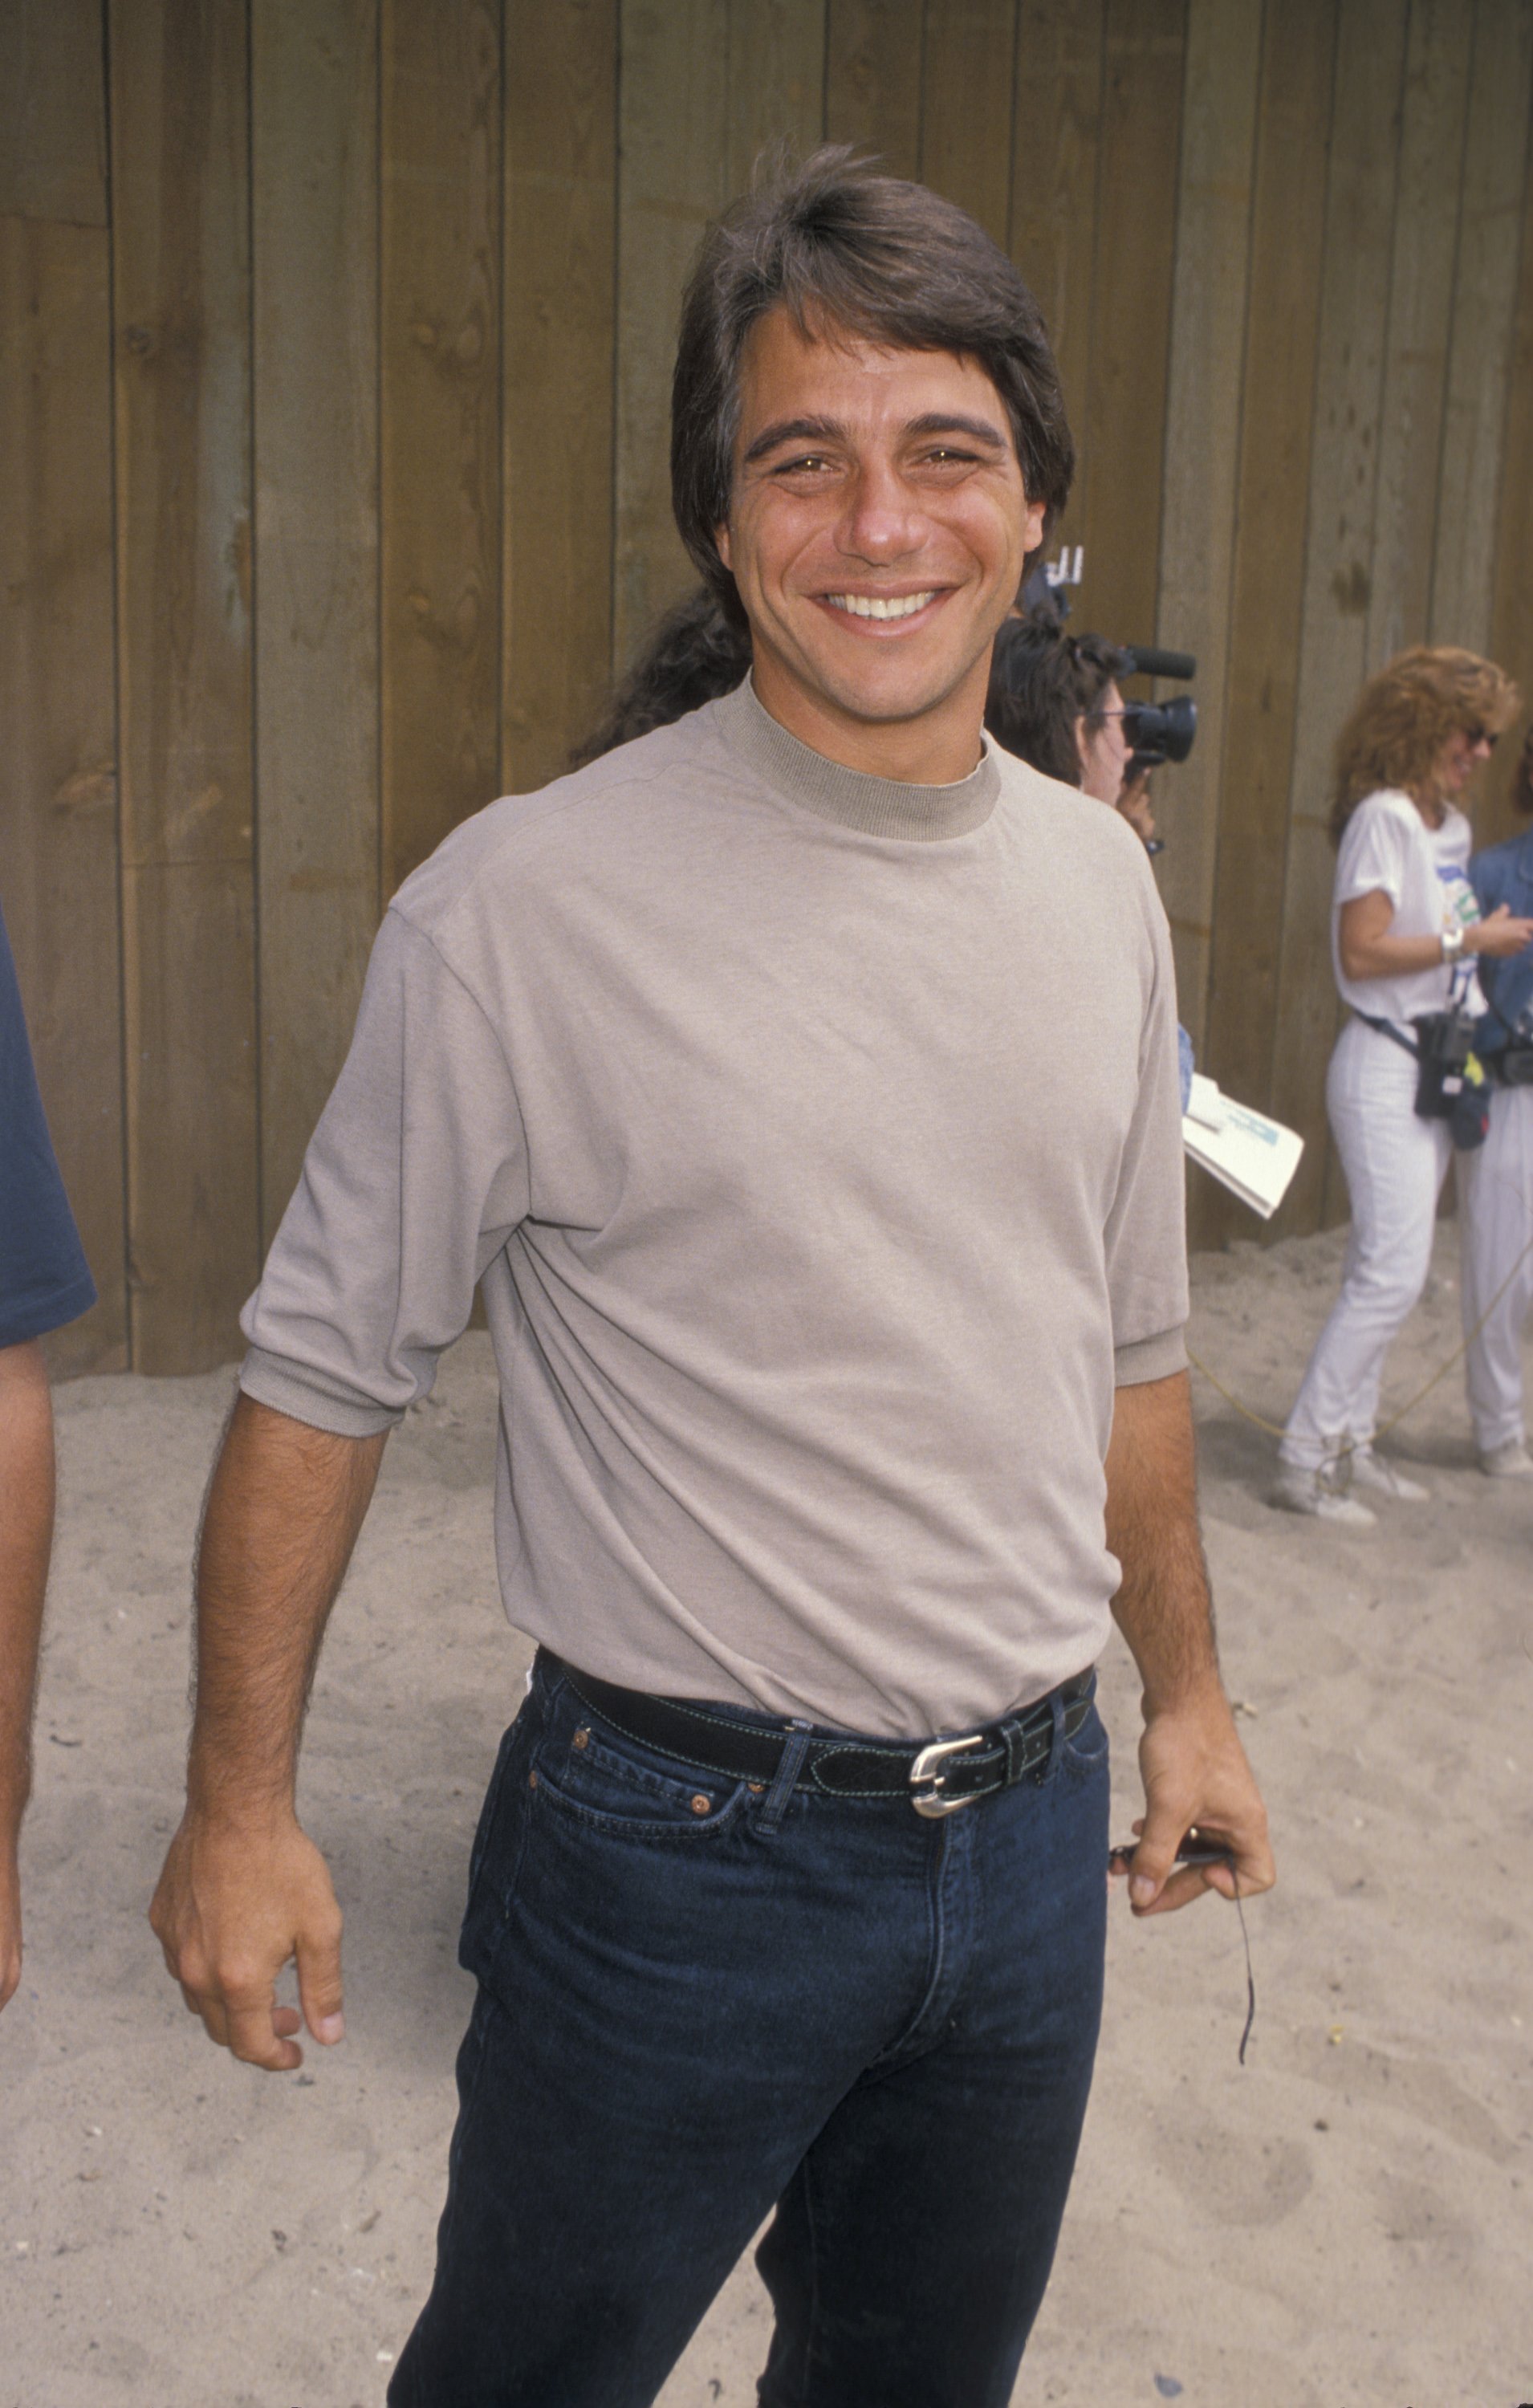 Tony Danza in 1989. | Photo: Getty Images